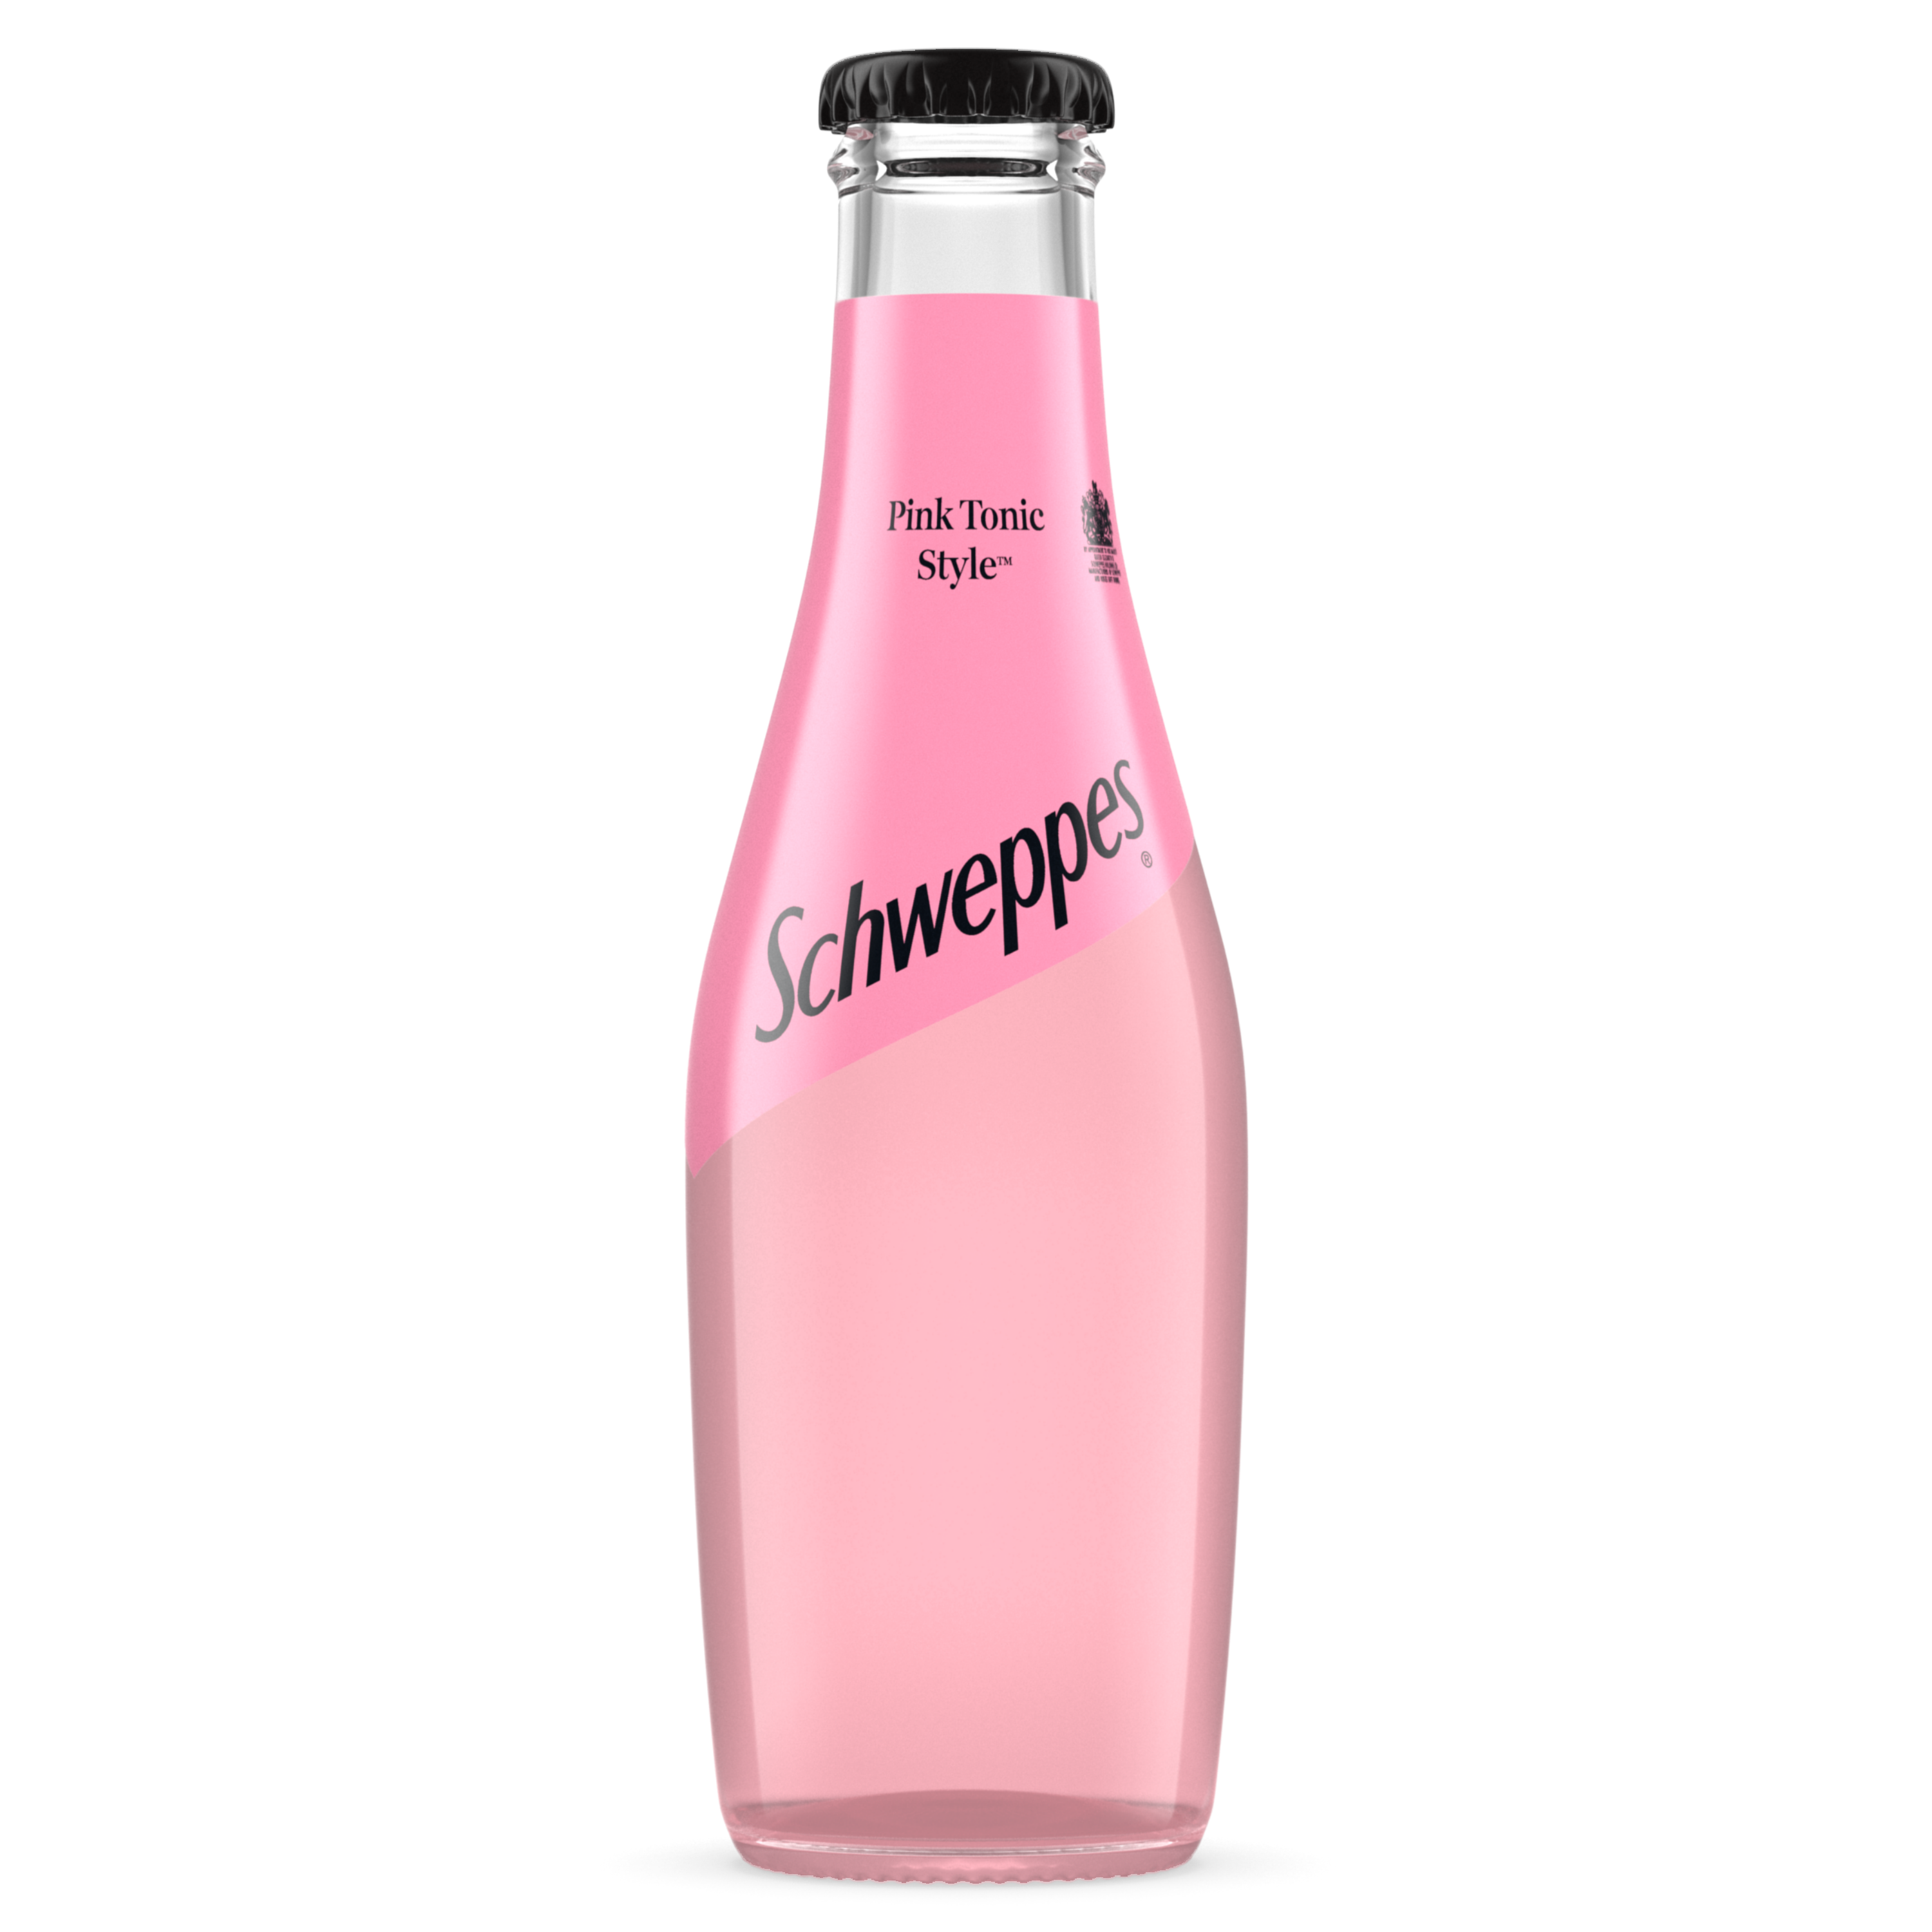 Schweppes pink tonic